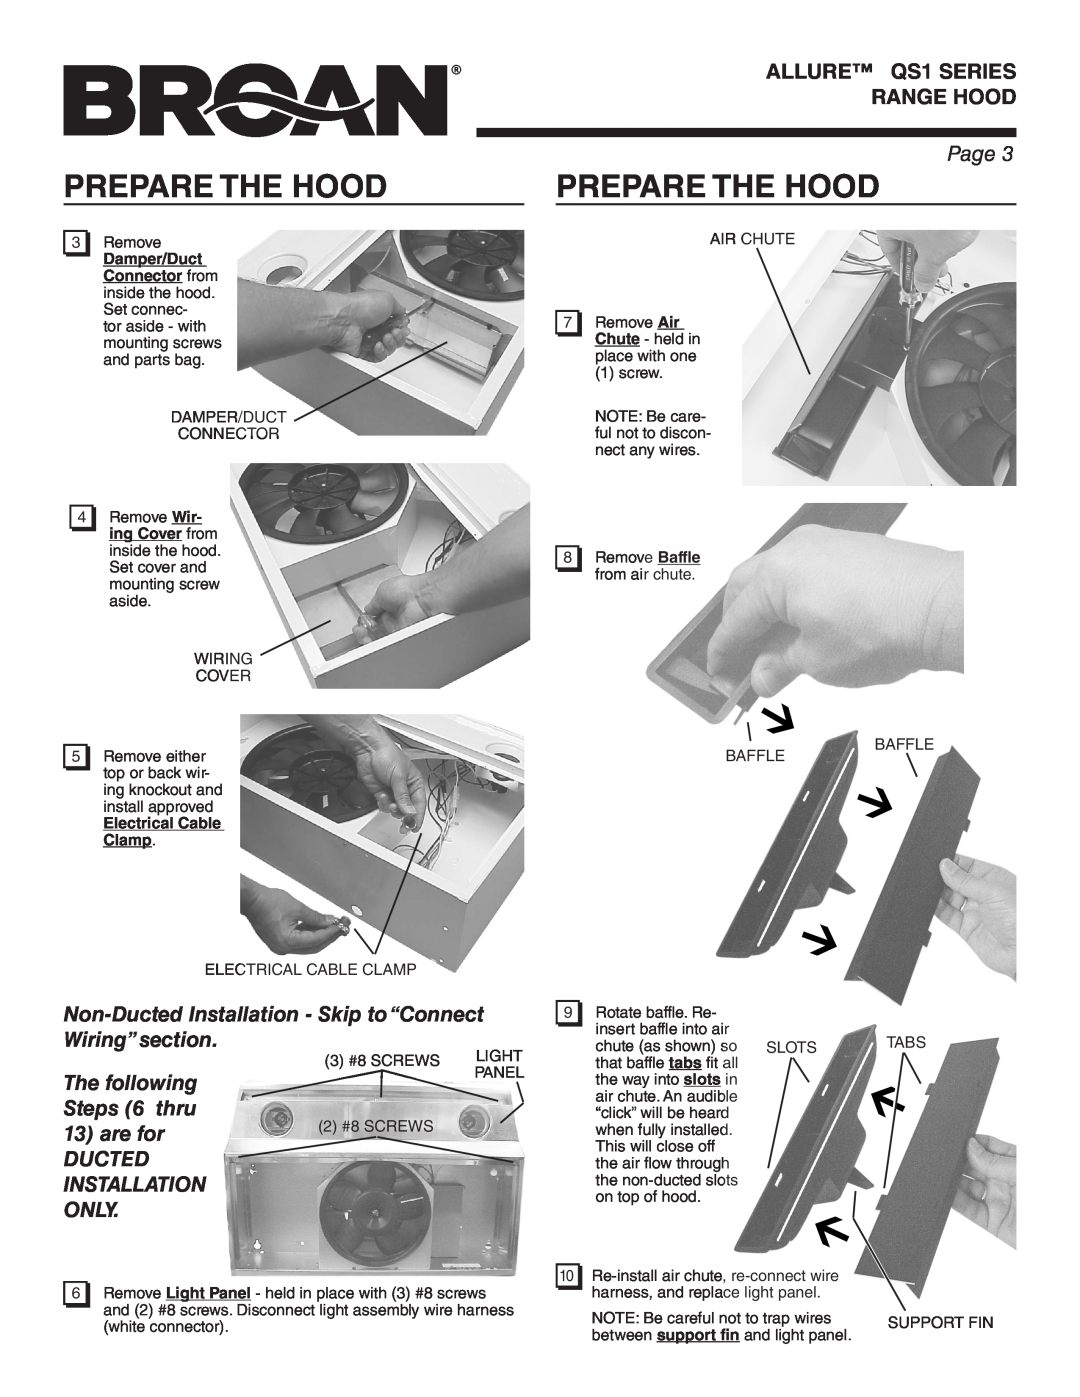 Broan QS136SS Non-DuctedInstallation - Skip to “Connect, Wiring” section, The following, Steps 6 thru, are for, Only, Page 